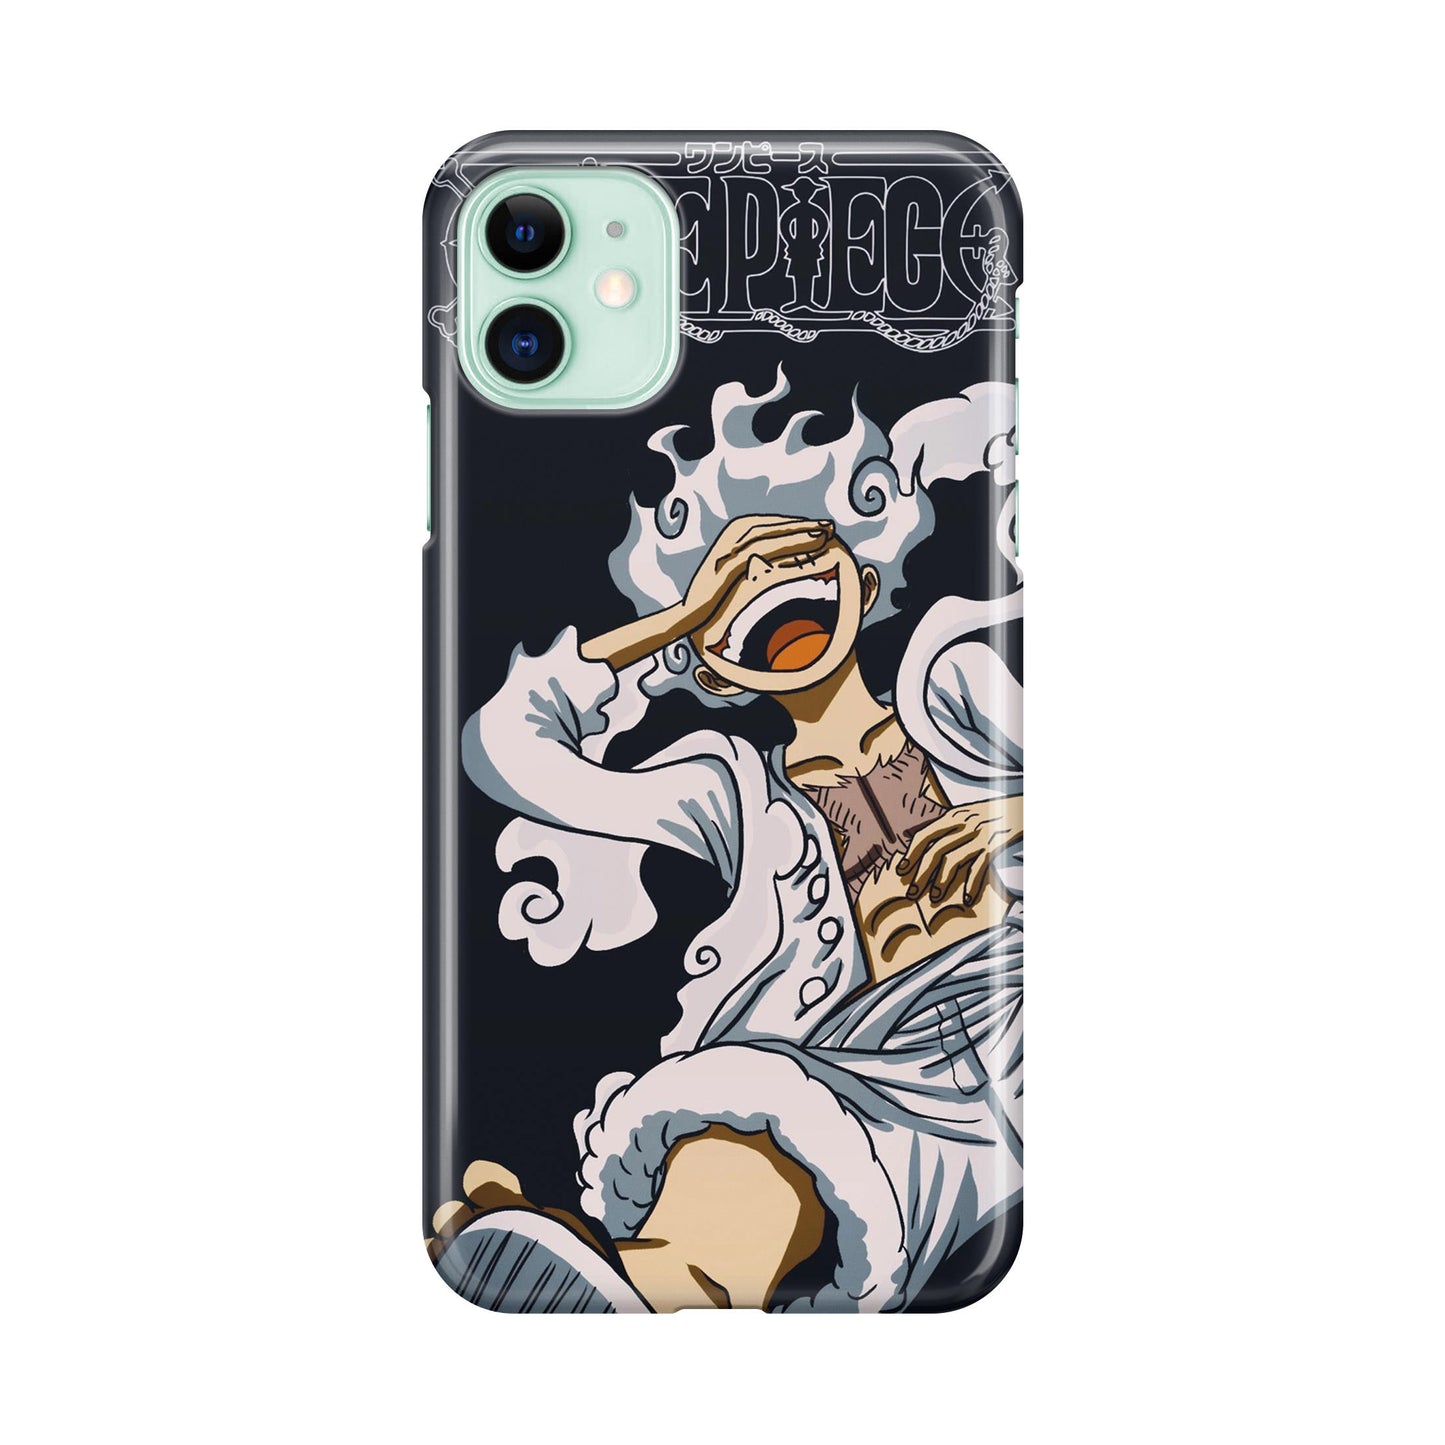 Gear 5 Iconic Laugh iPhone 11 Case